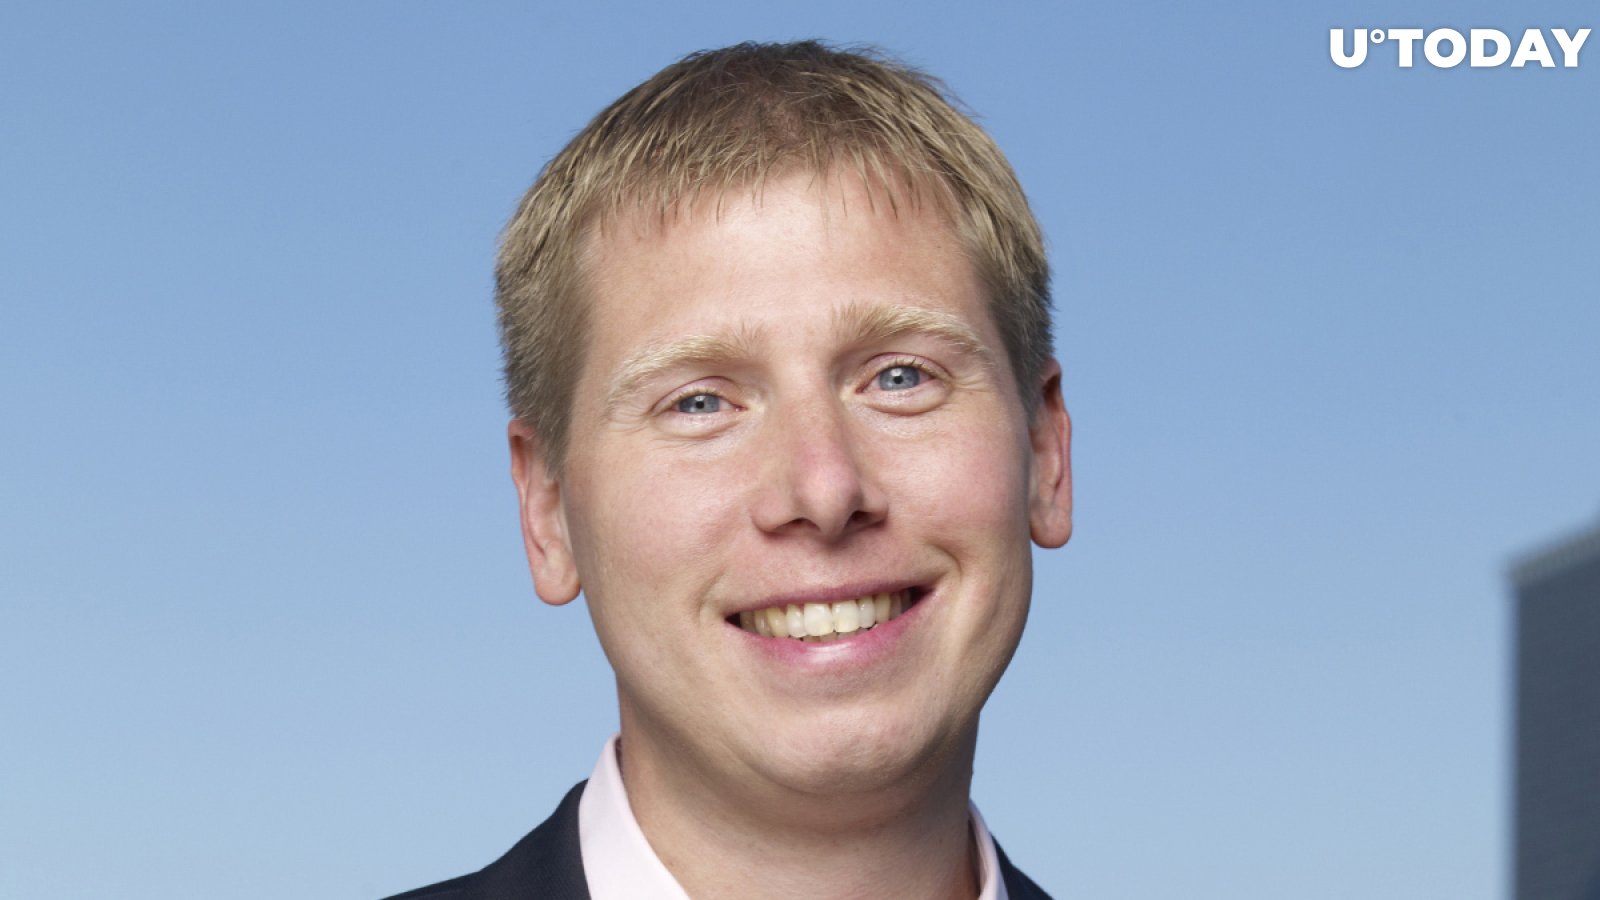 Grayscale's "Drop Gold" Ad Campaign Was Money Well Spent: Grayscale Founder Barry Silbert